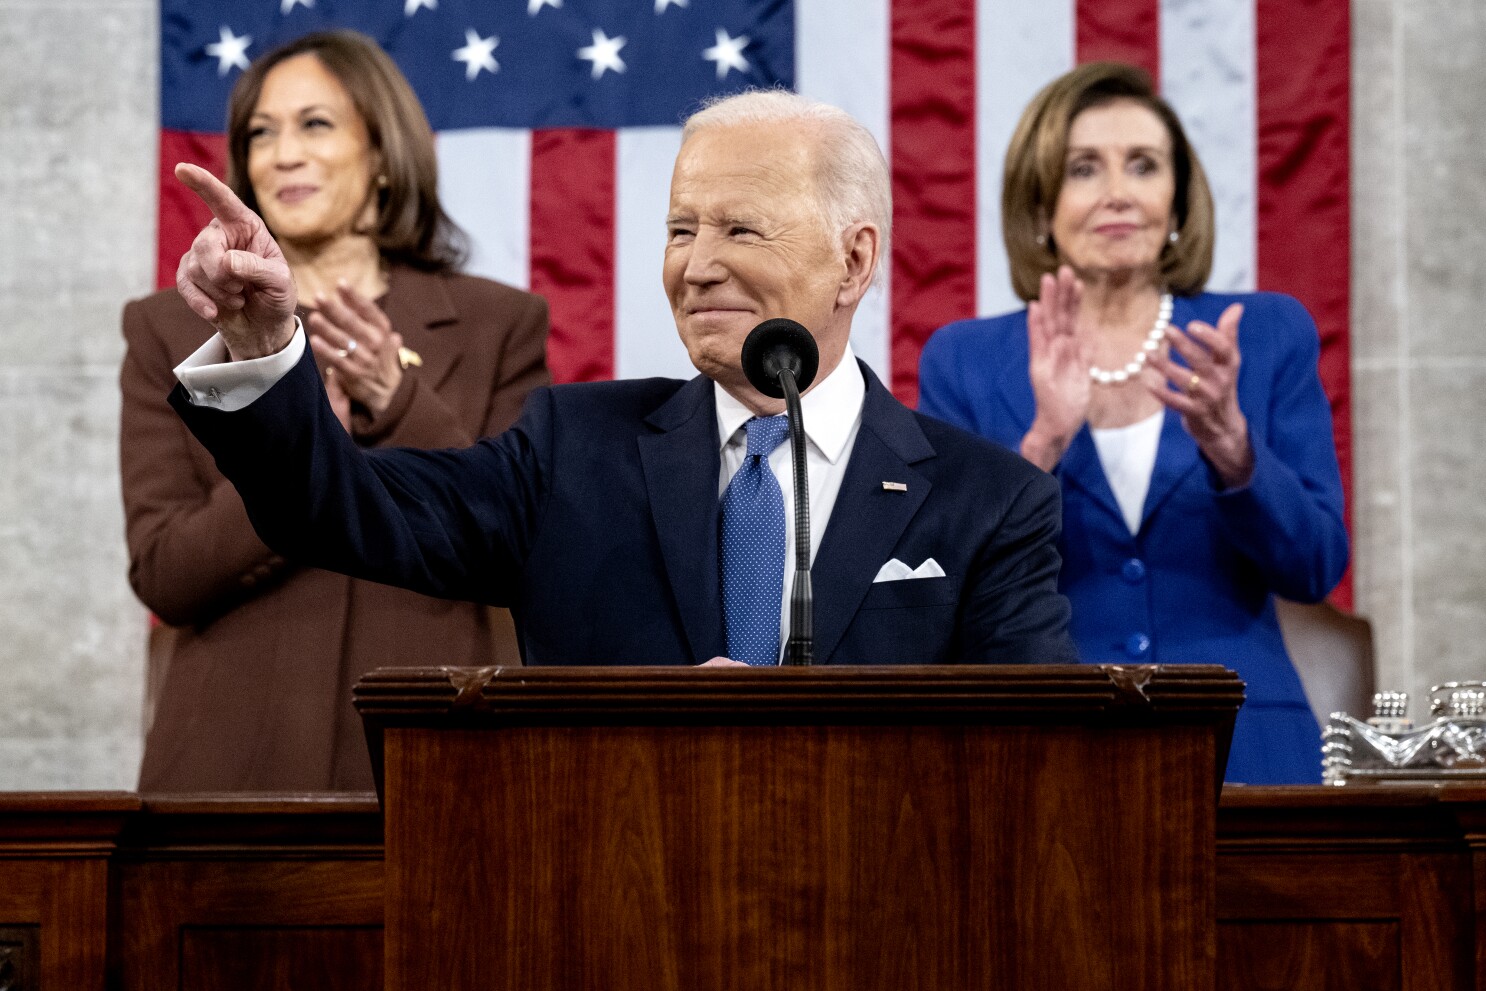 President Biden stands at a podium at his 2022 State of the Union Address. Kamala Harris and Nancy Pelosi stand behind him.